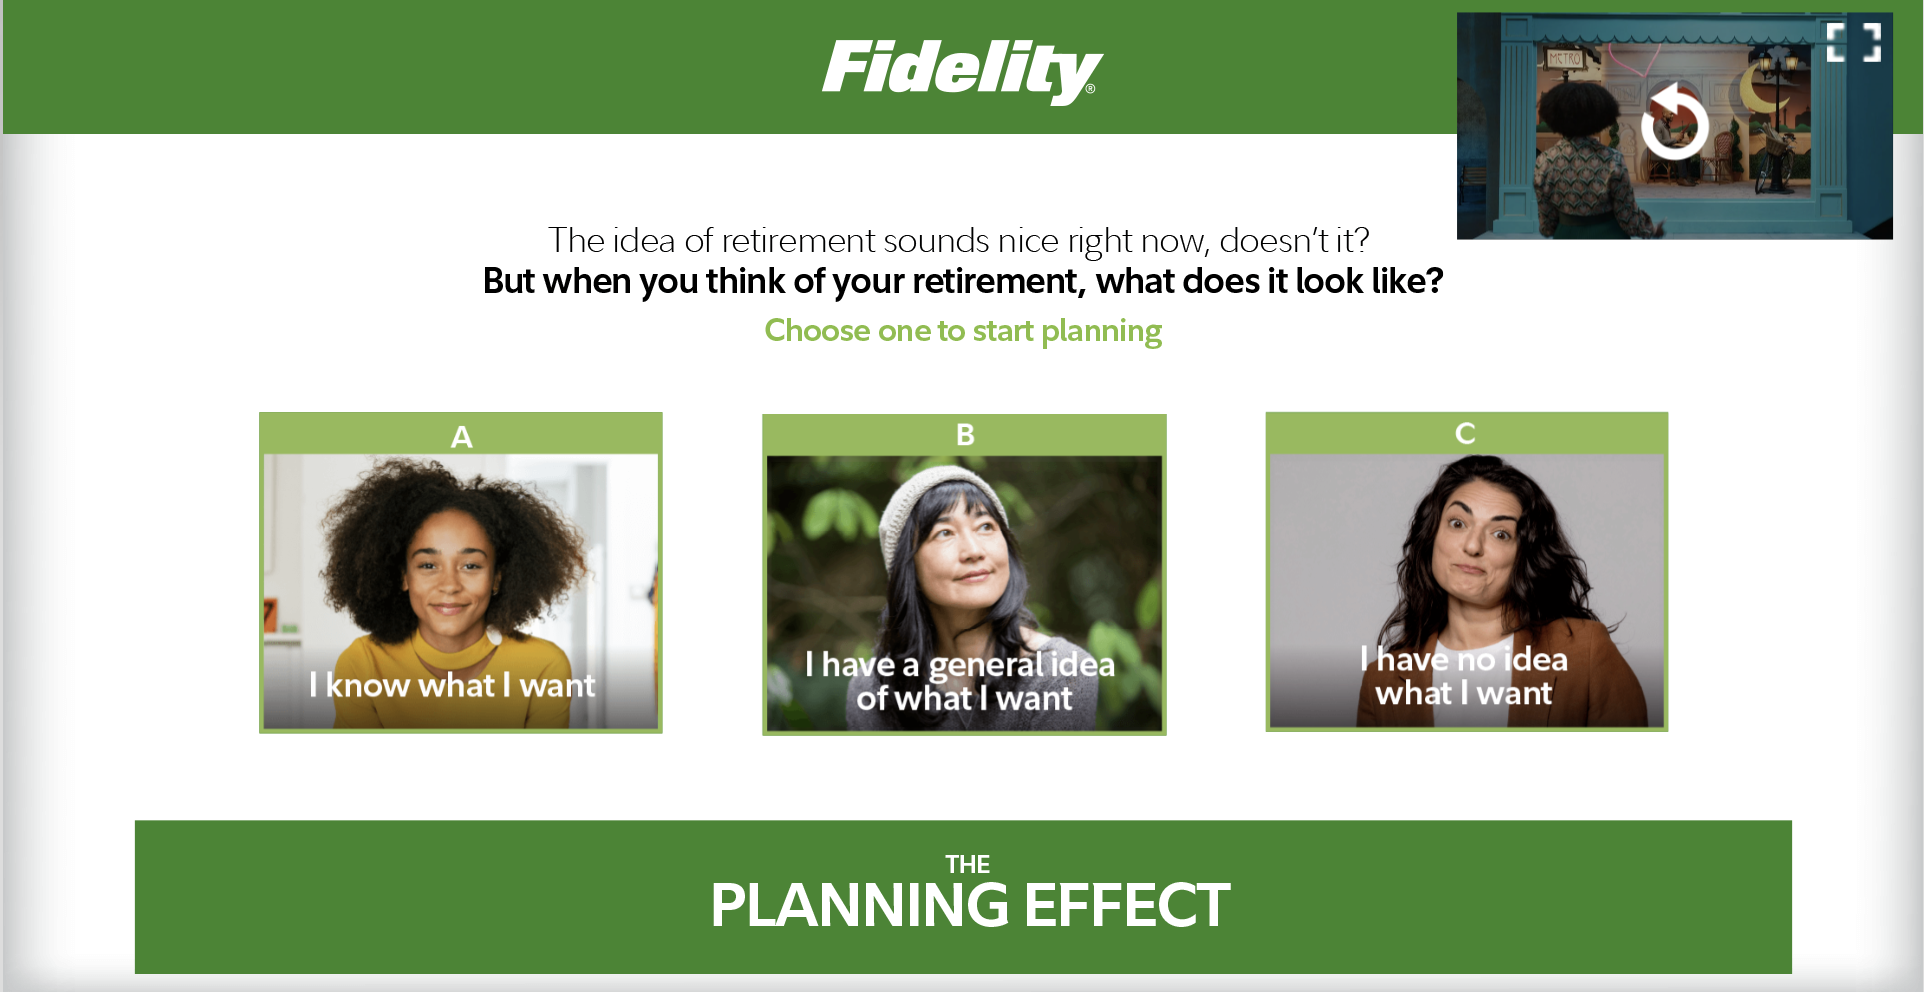 Fidelity Ad Content Collections